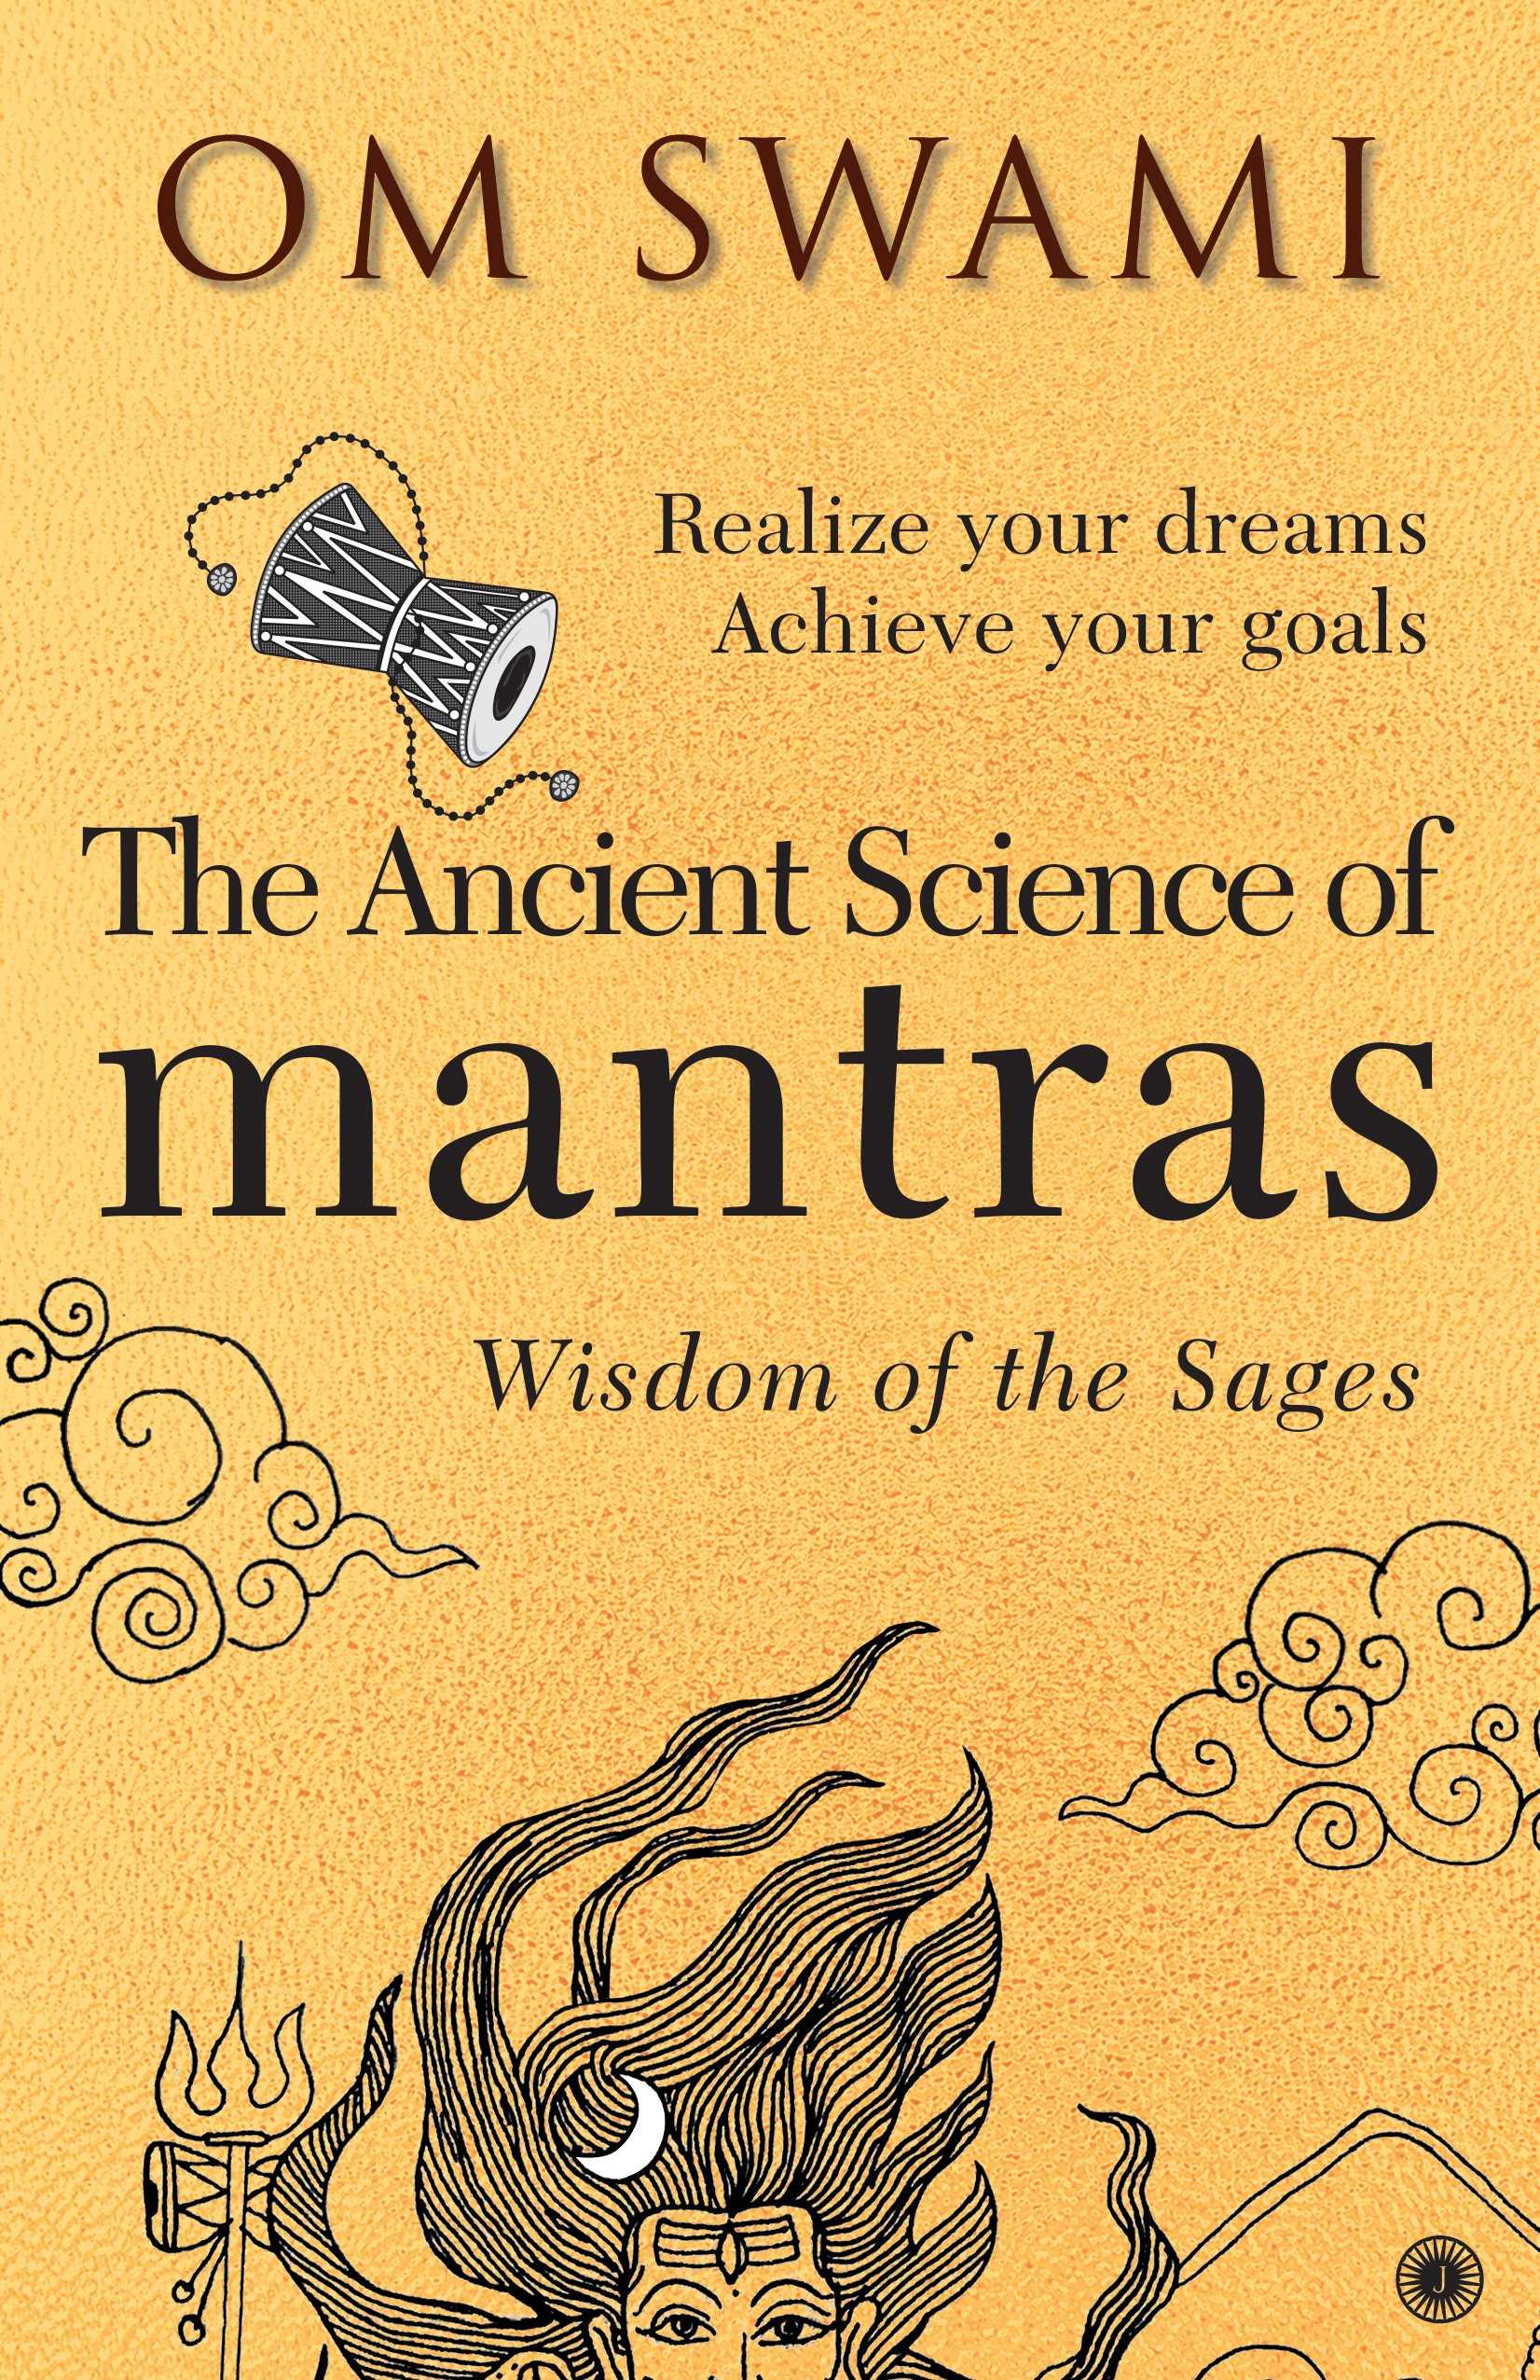 THE ANCIENT SCIENCE OF MANTRAS (WISDOM OF THE SAGES)